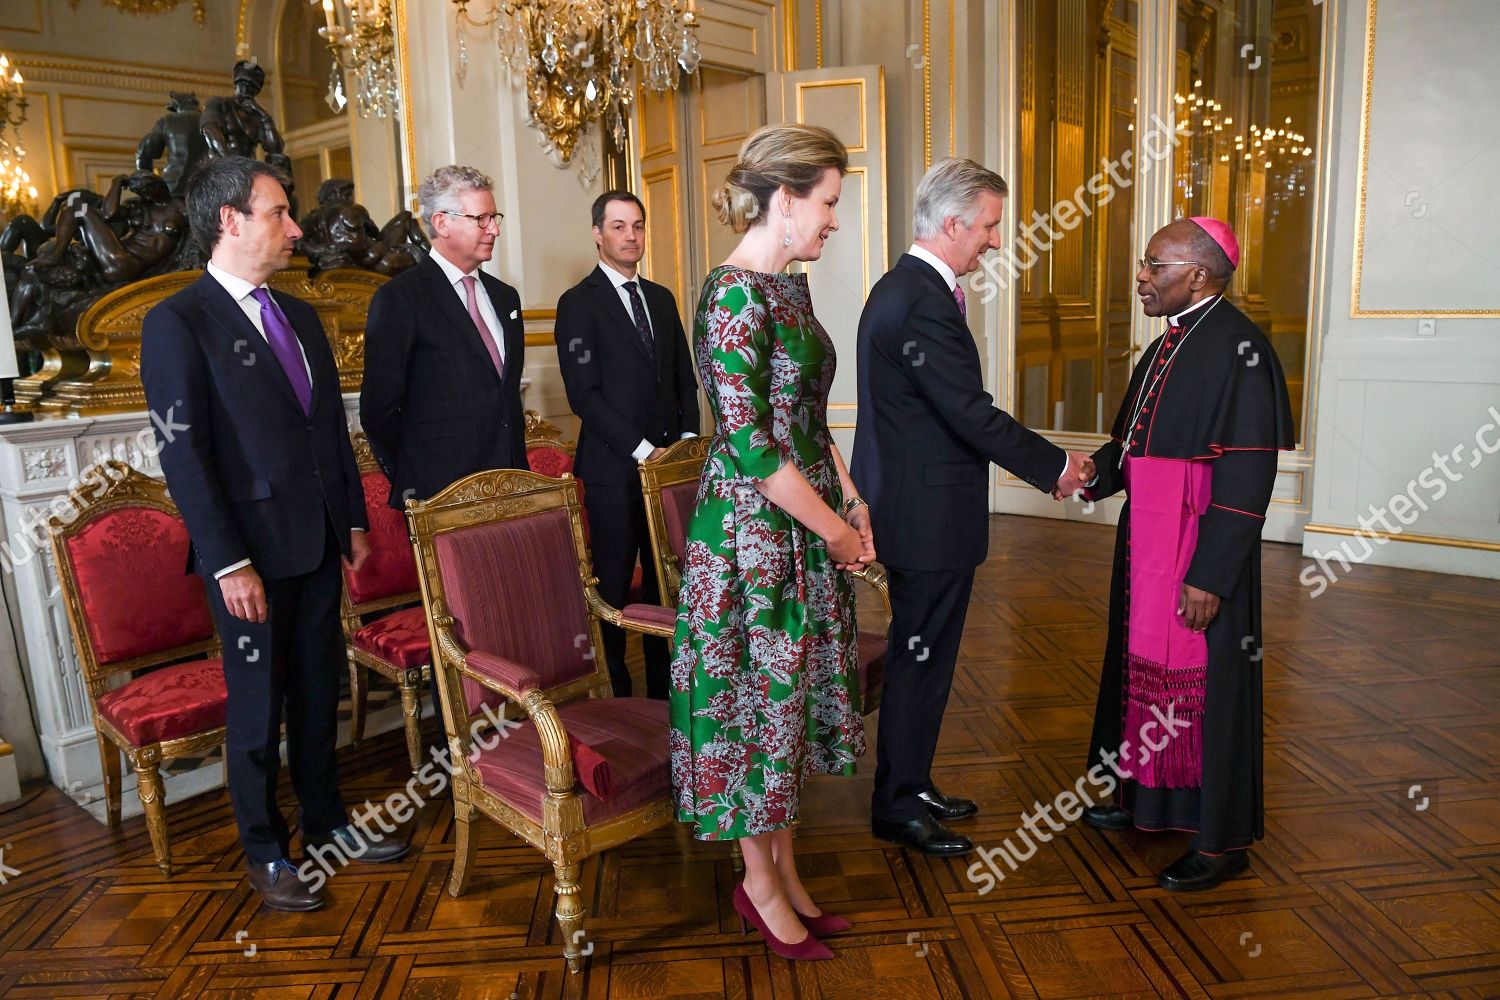 king-philippe-and-queen-mathilde-receive-the-heads-of-diplomatic-missions-brussels-belgium-shutterstock-editorial-10525487a.jpg